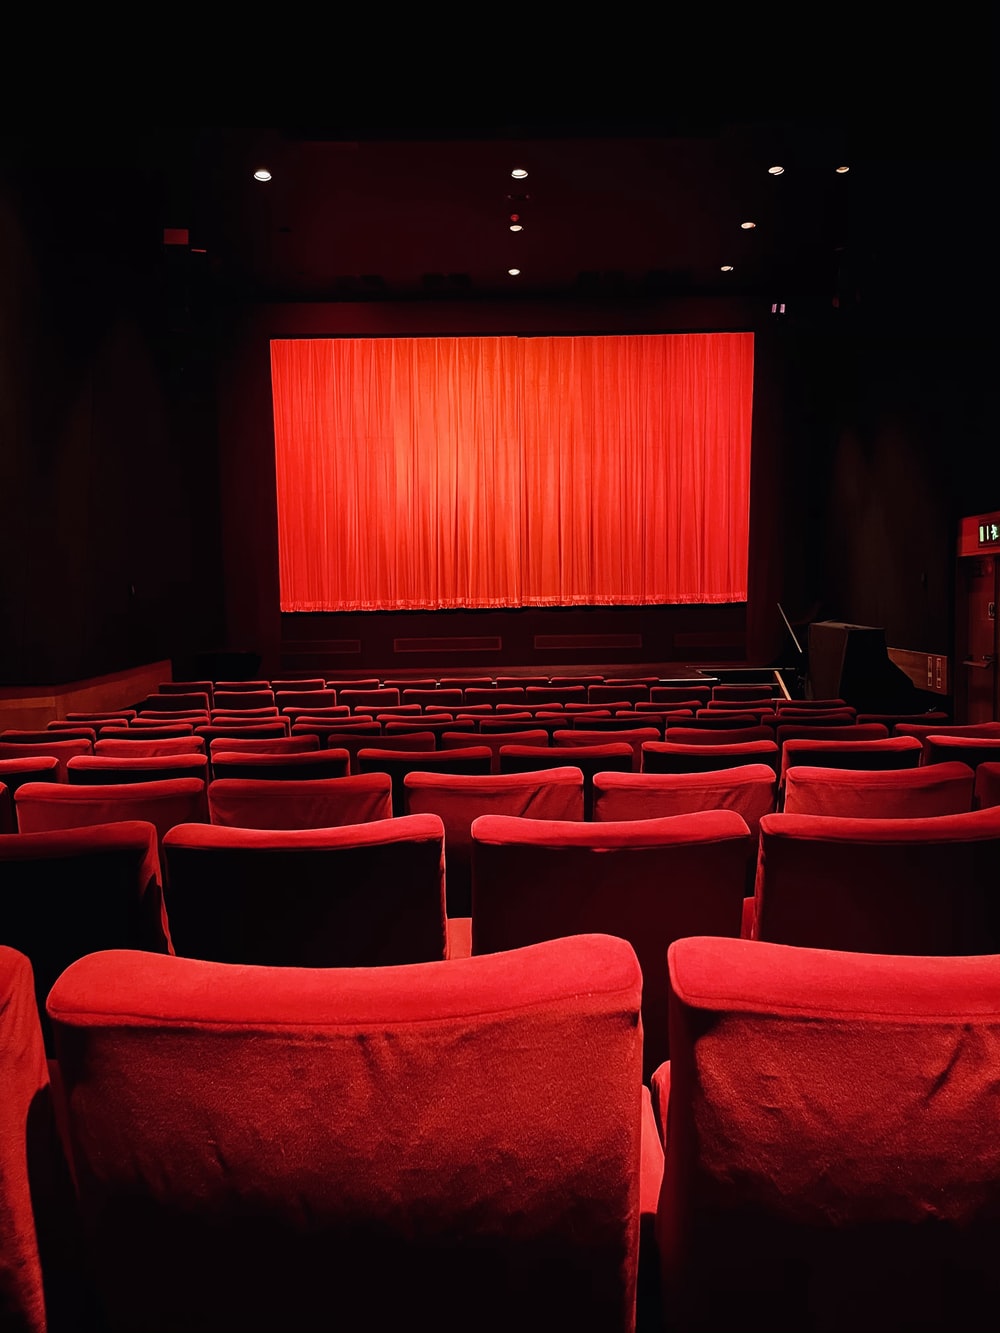 Movie Theater Picture. Download Free Image